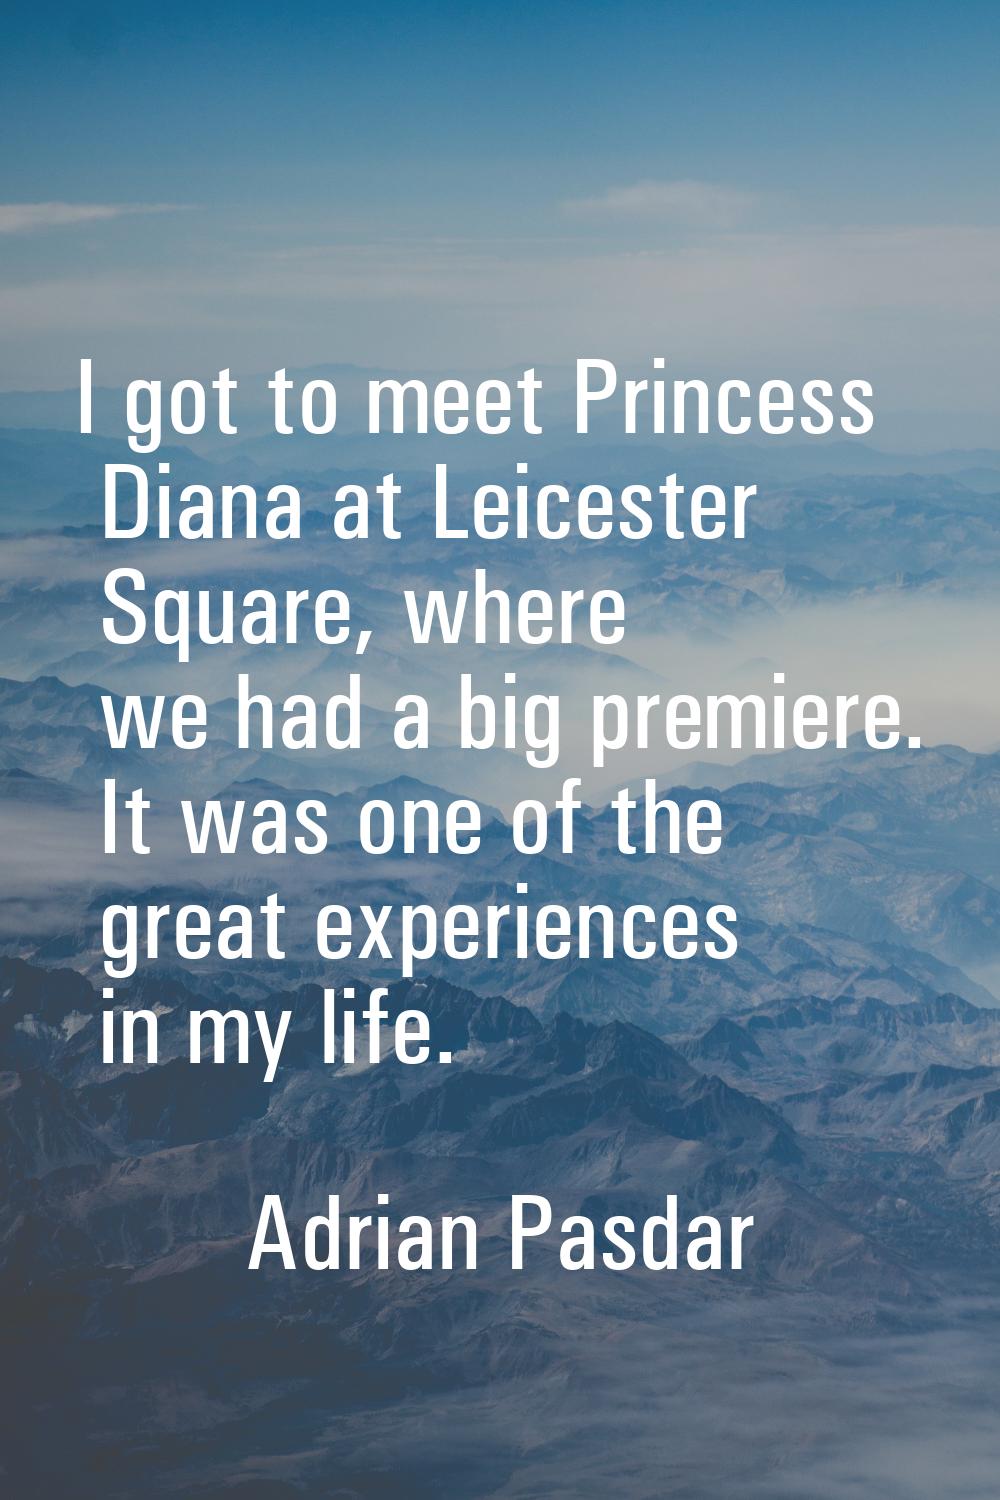 I got to meet Princess Diana at Leicester Square, where we had a big premiere. It was one of the gr